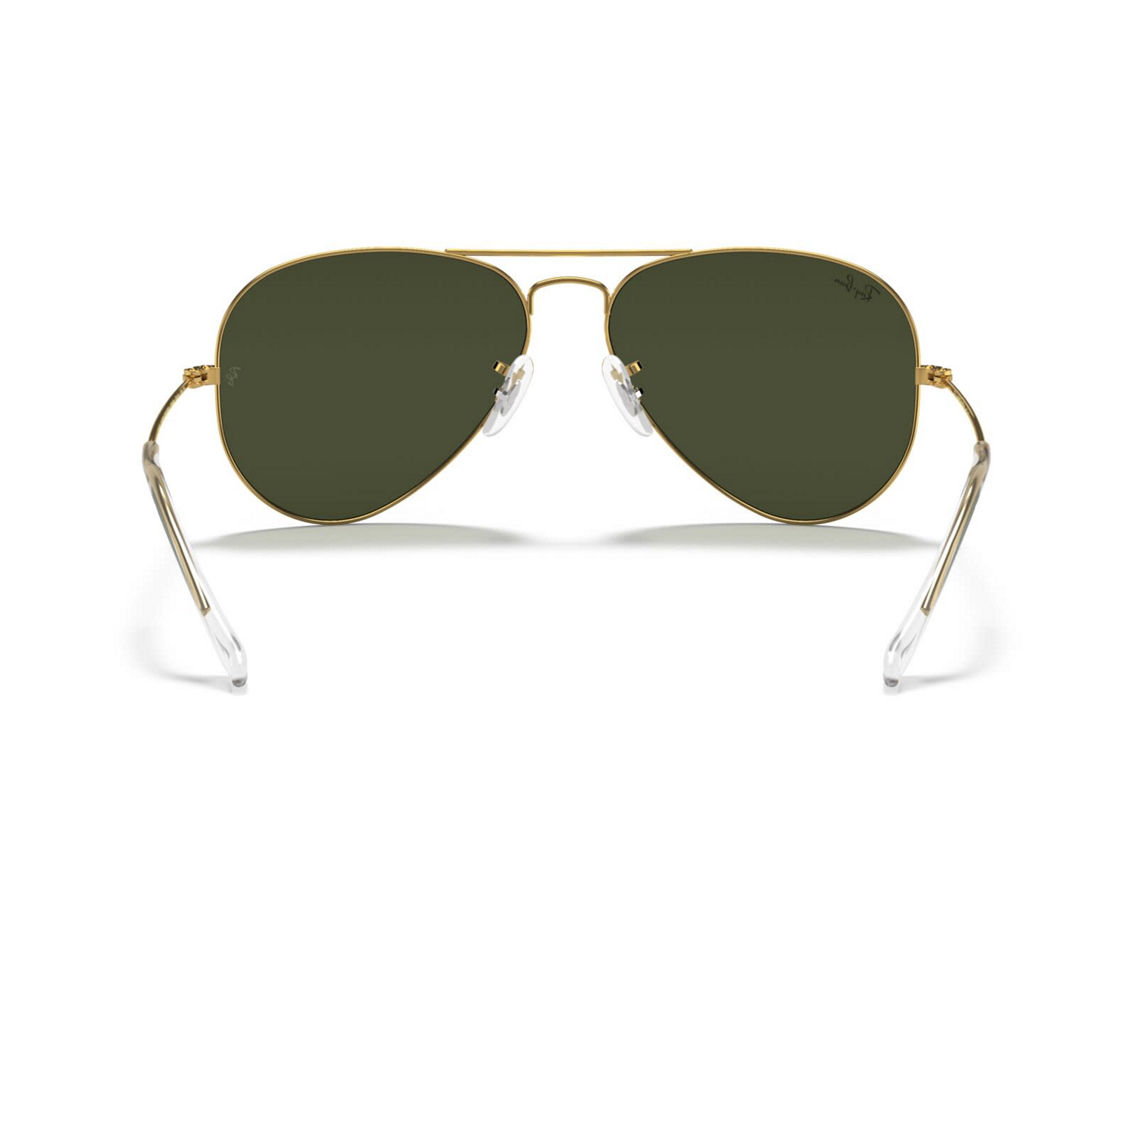 Ray-Ban RB3025 Aviator Classic - Image 4 of 5